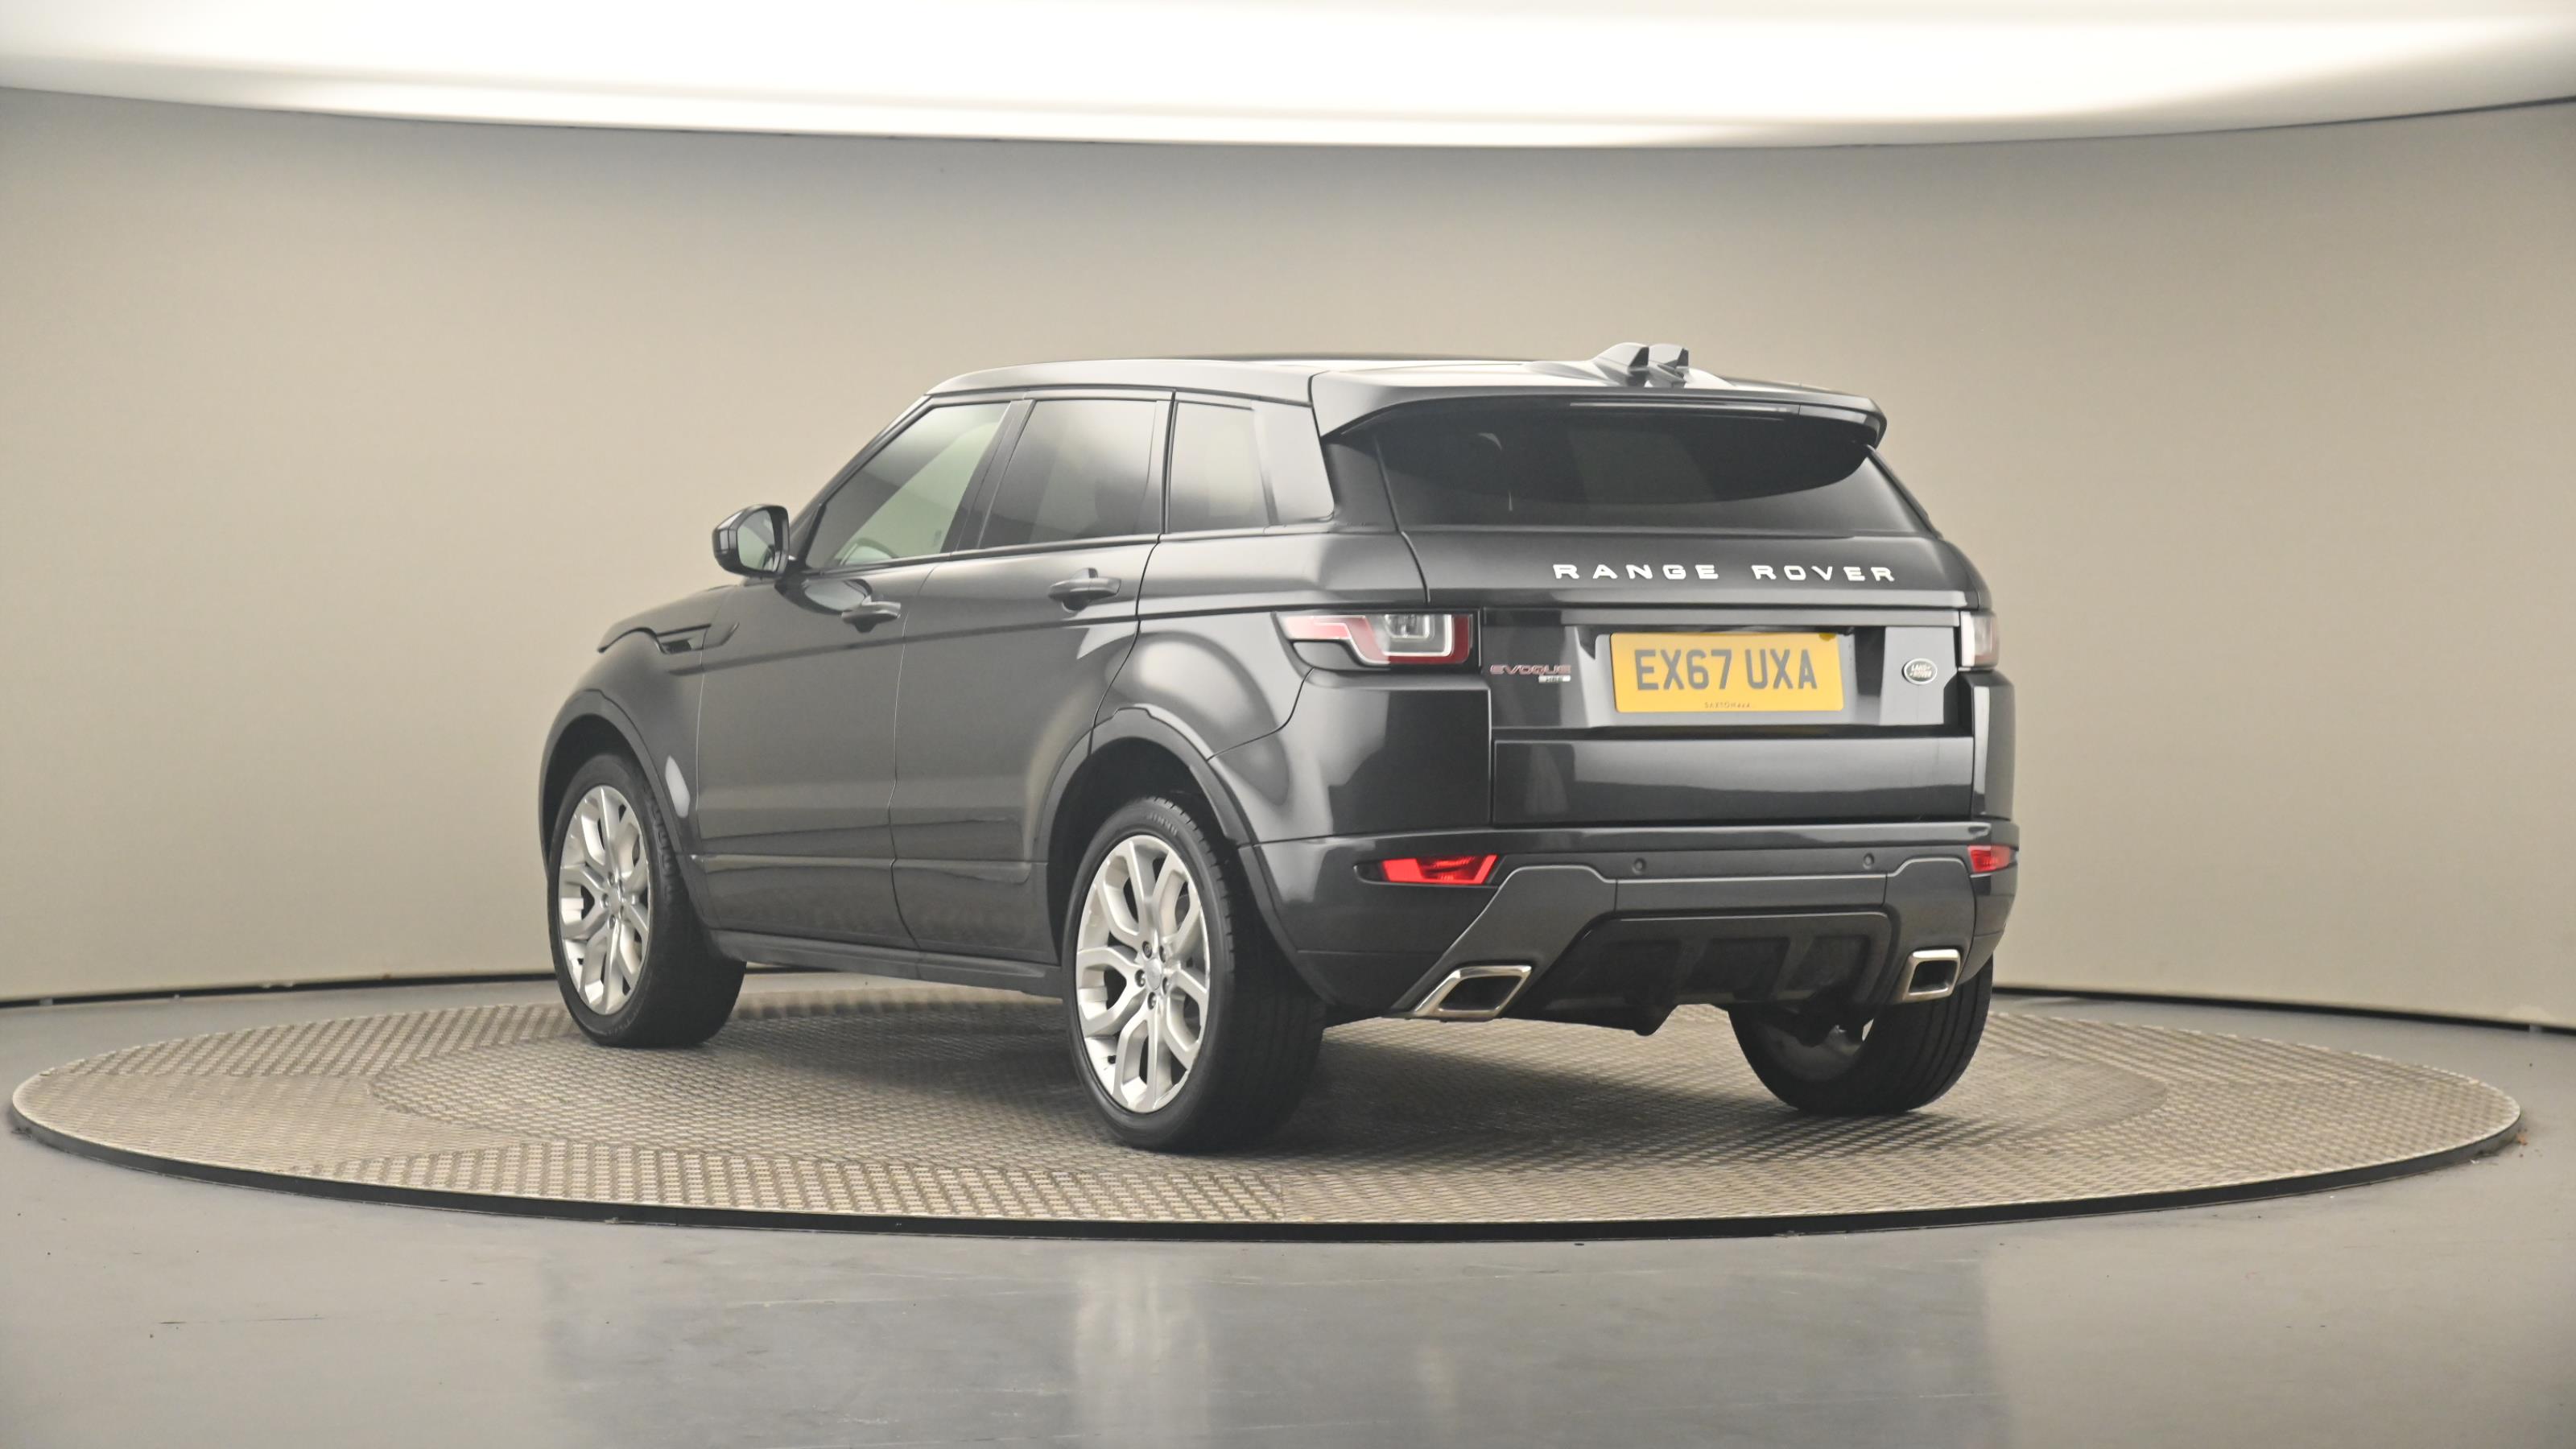 Used 2017 Land Rover Range Rover Evoque 20 Td4 Hse Dynamic 5dr Auto £